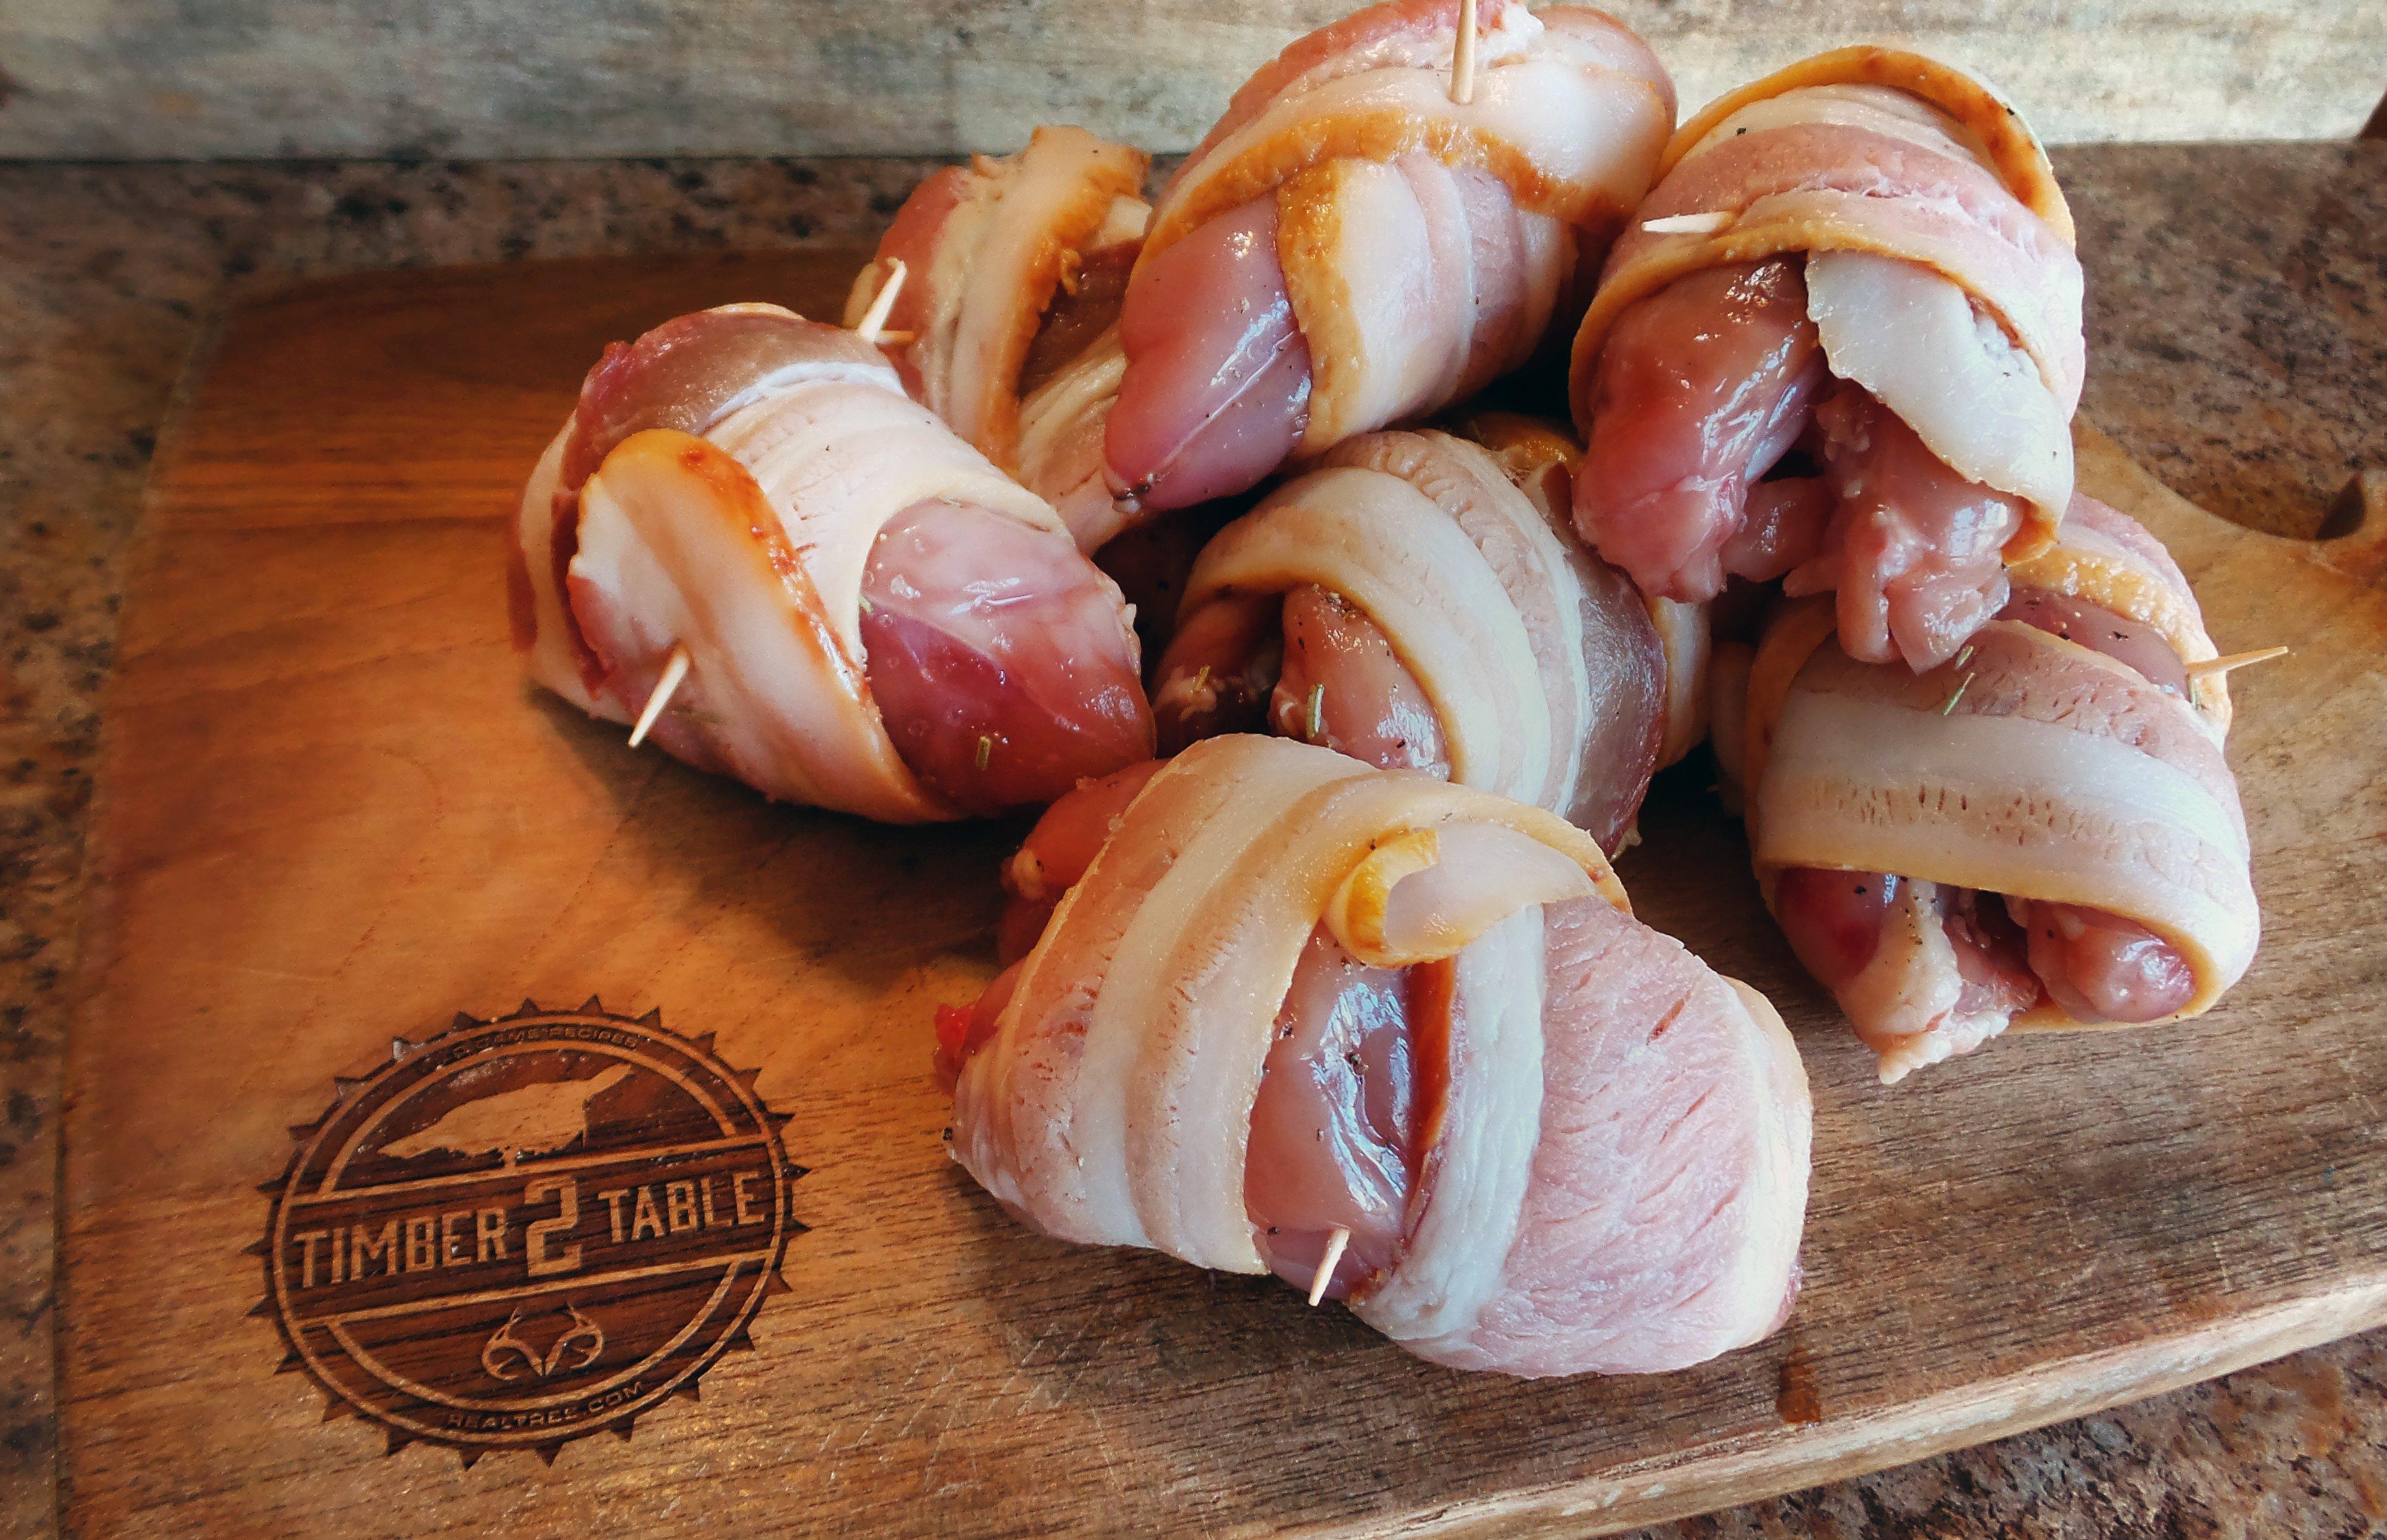 Season each quail breast, wrap in bacon, and secure with a toothpick.